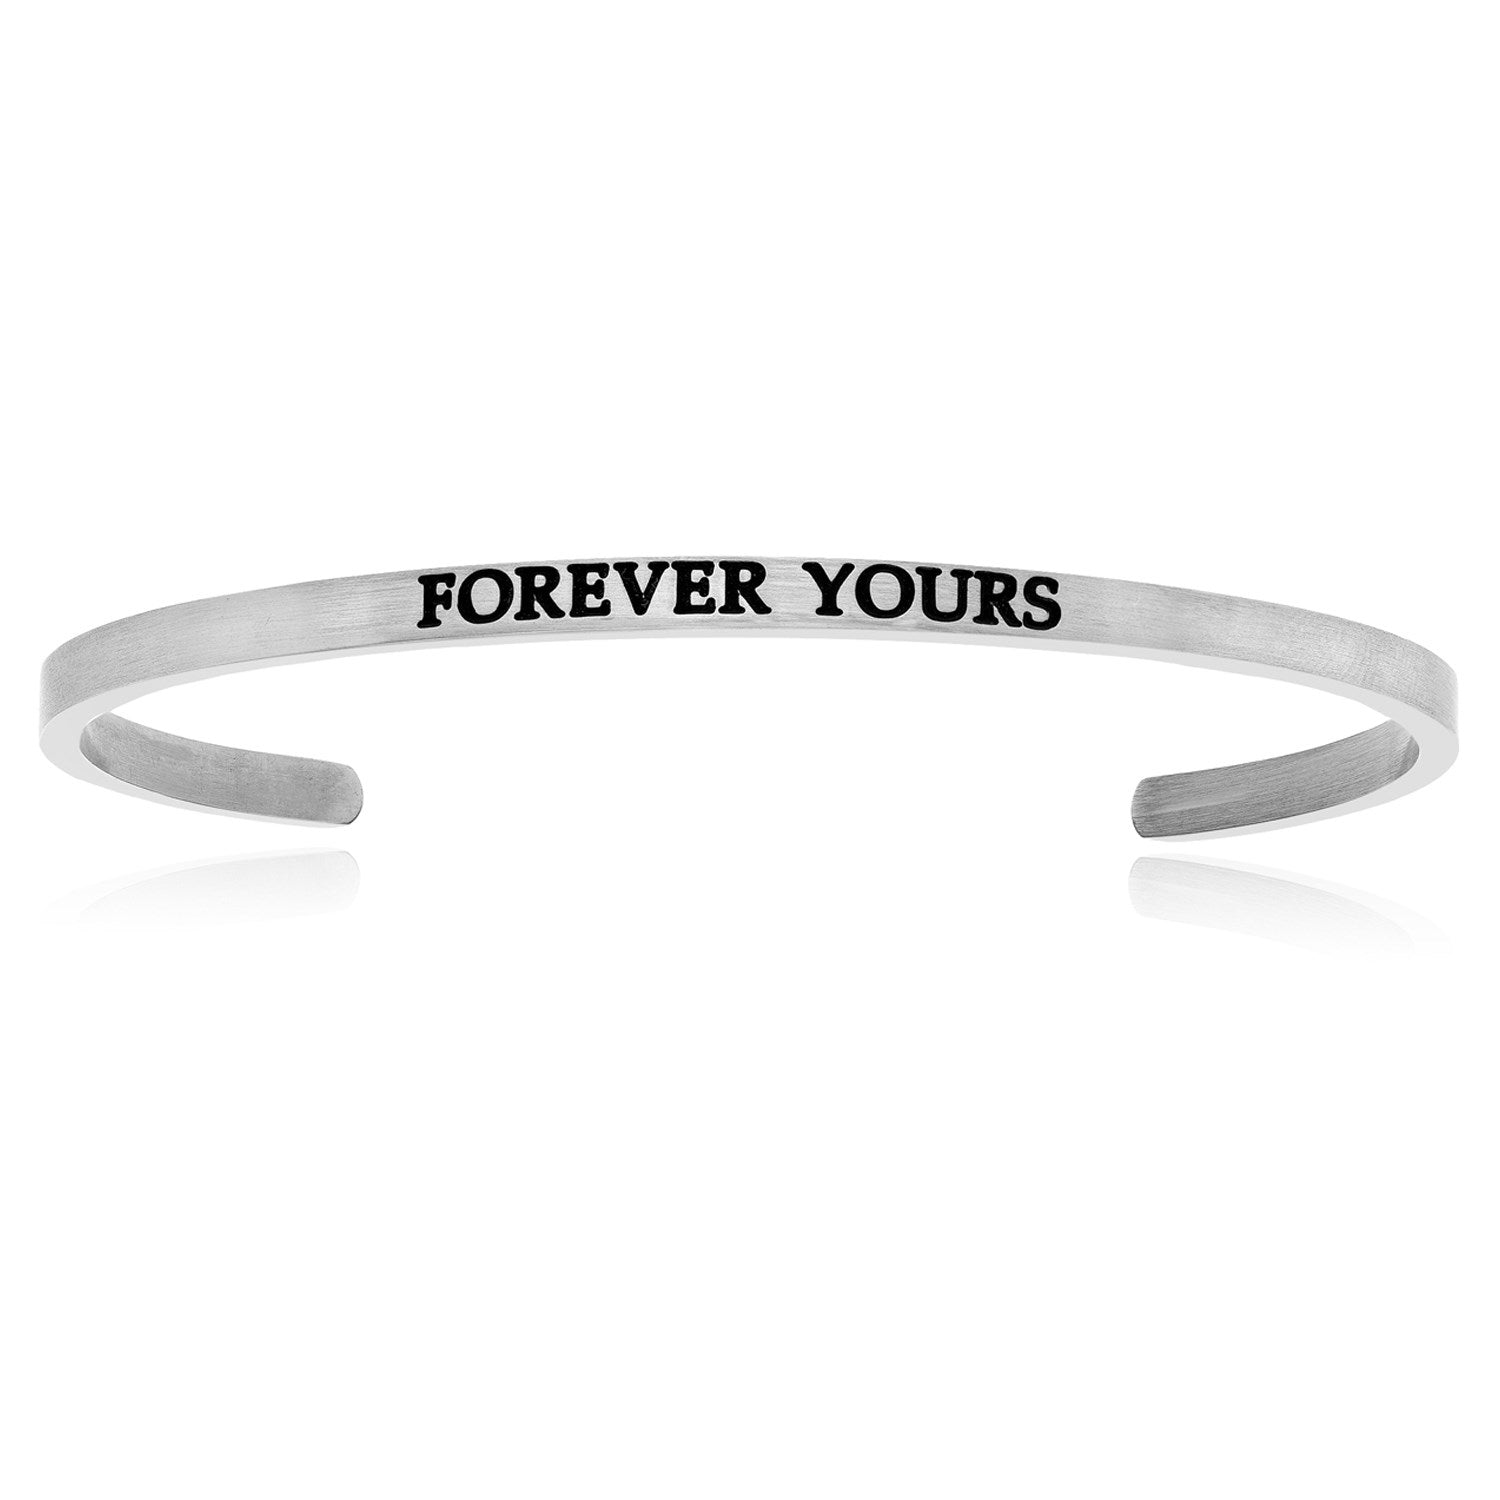 Stainless Steel Forever Yours Cuff Bracelet